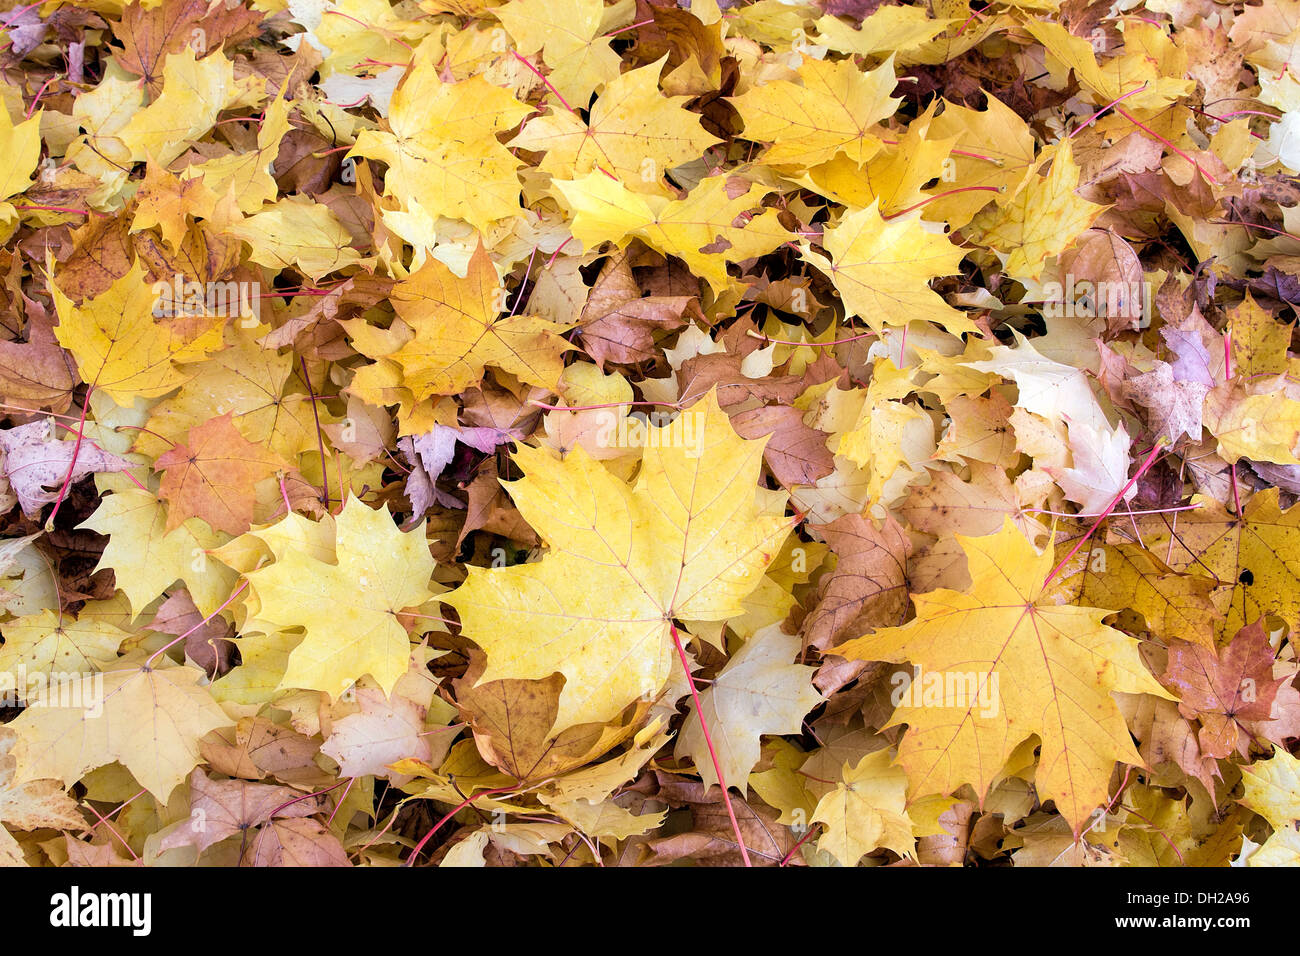 Fallen Maple Tree Leaves Piled Up on Backyard Ground in Autumn Background Stock Photo